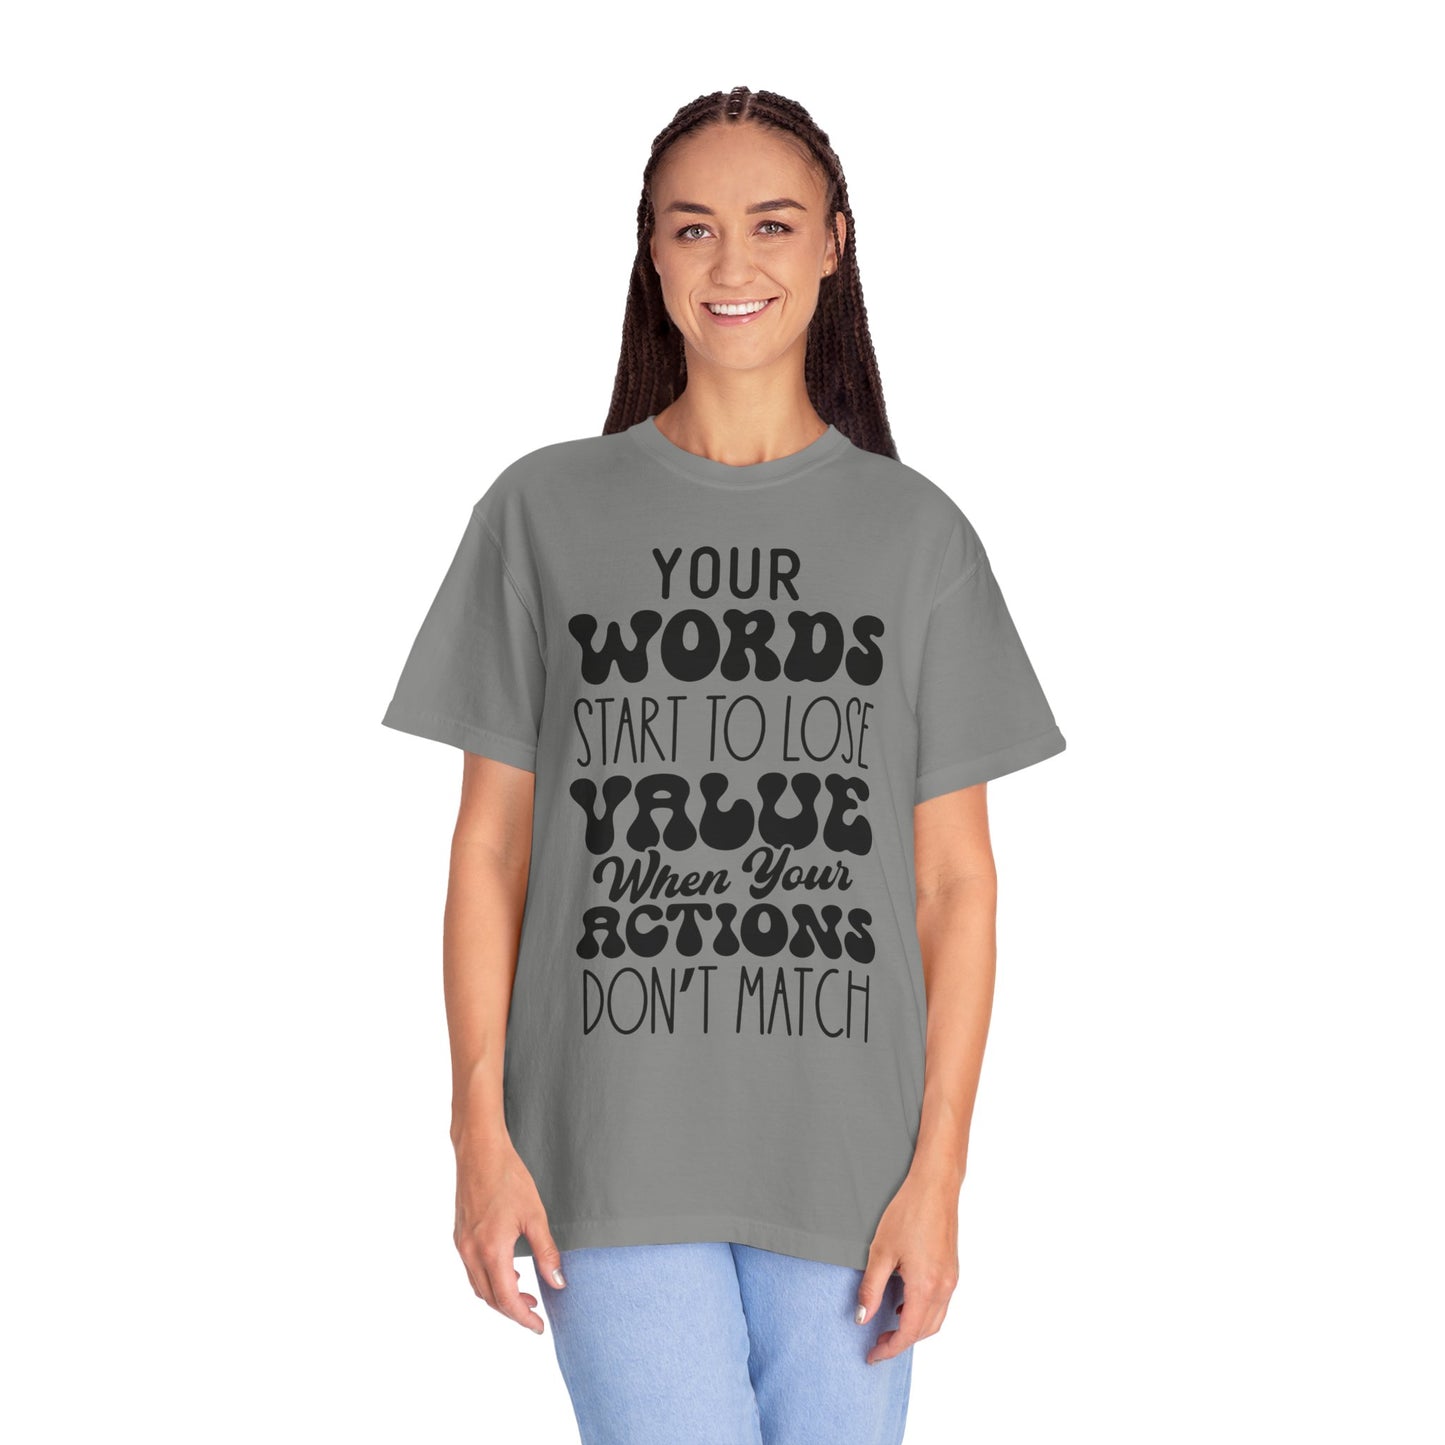 Your word starts to lose value - Unisex Garment-Dyed T-shirt